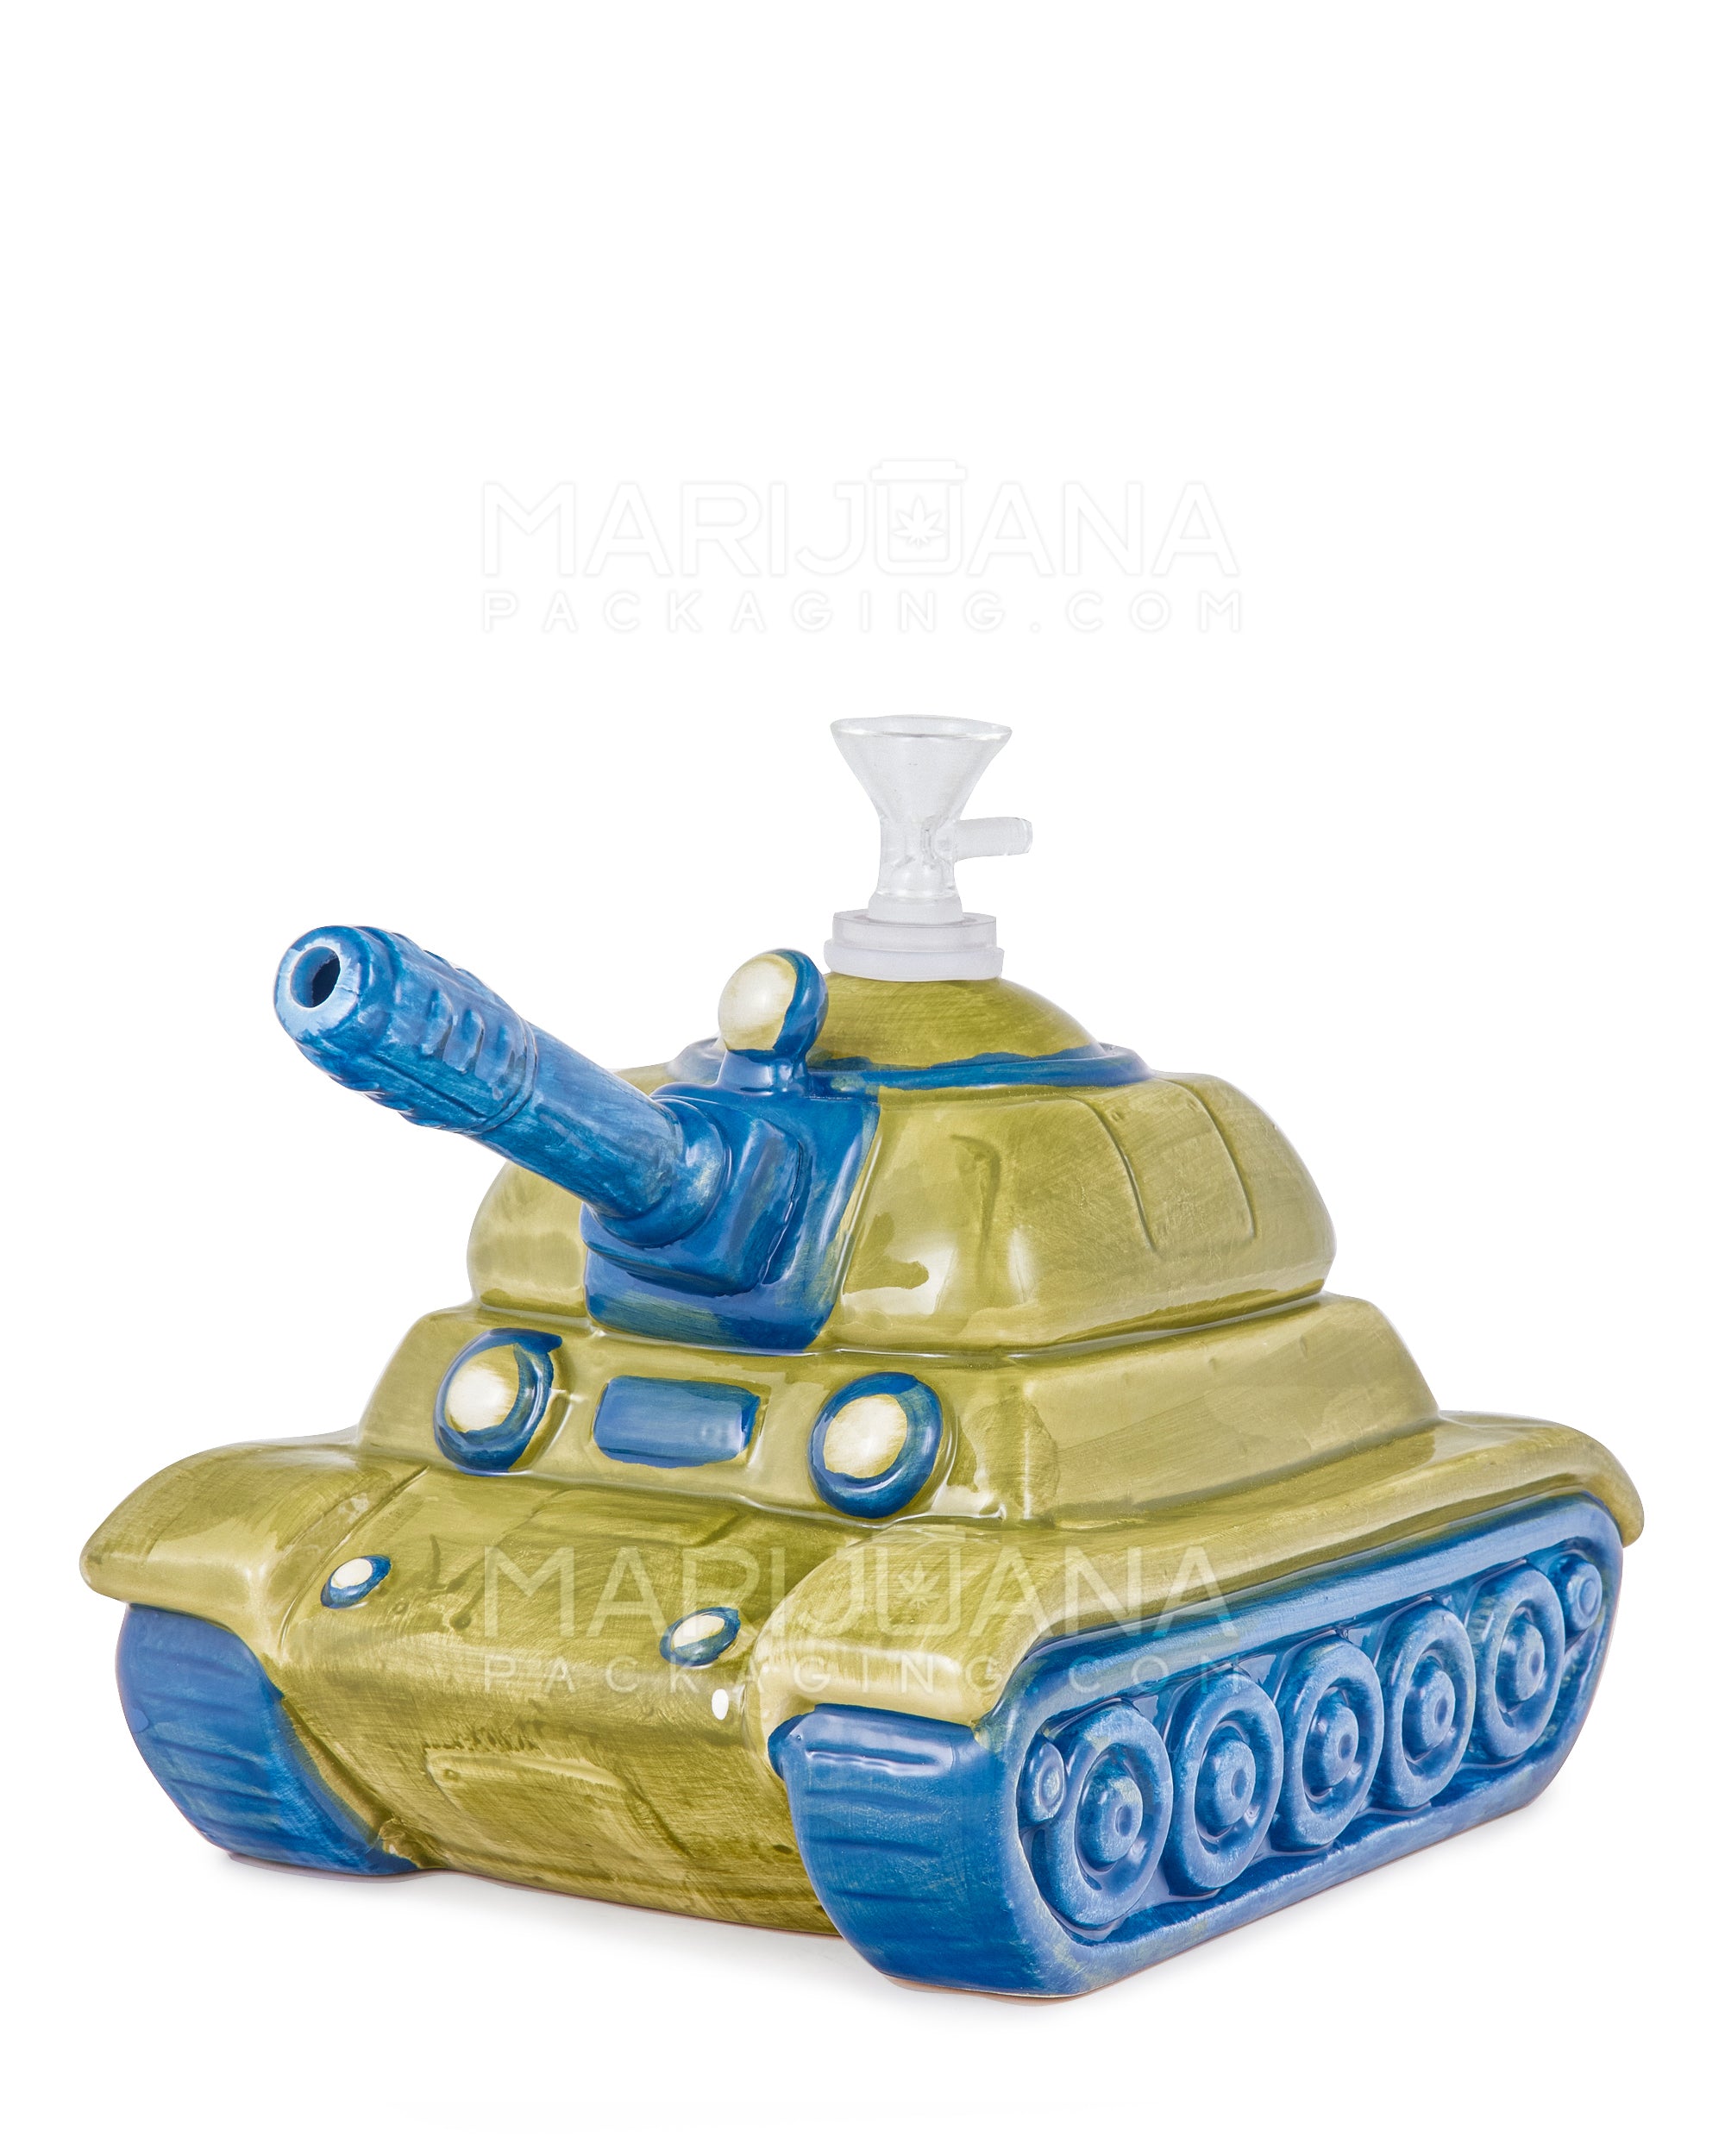 Military Tank Painted Ceramic Pipe | 8in Long - 14mm Bowl - Mixed - 1